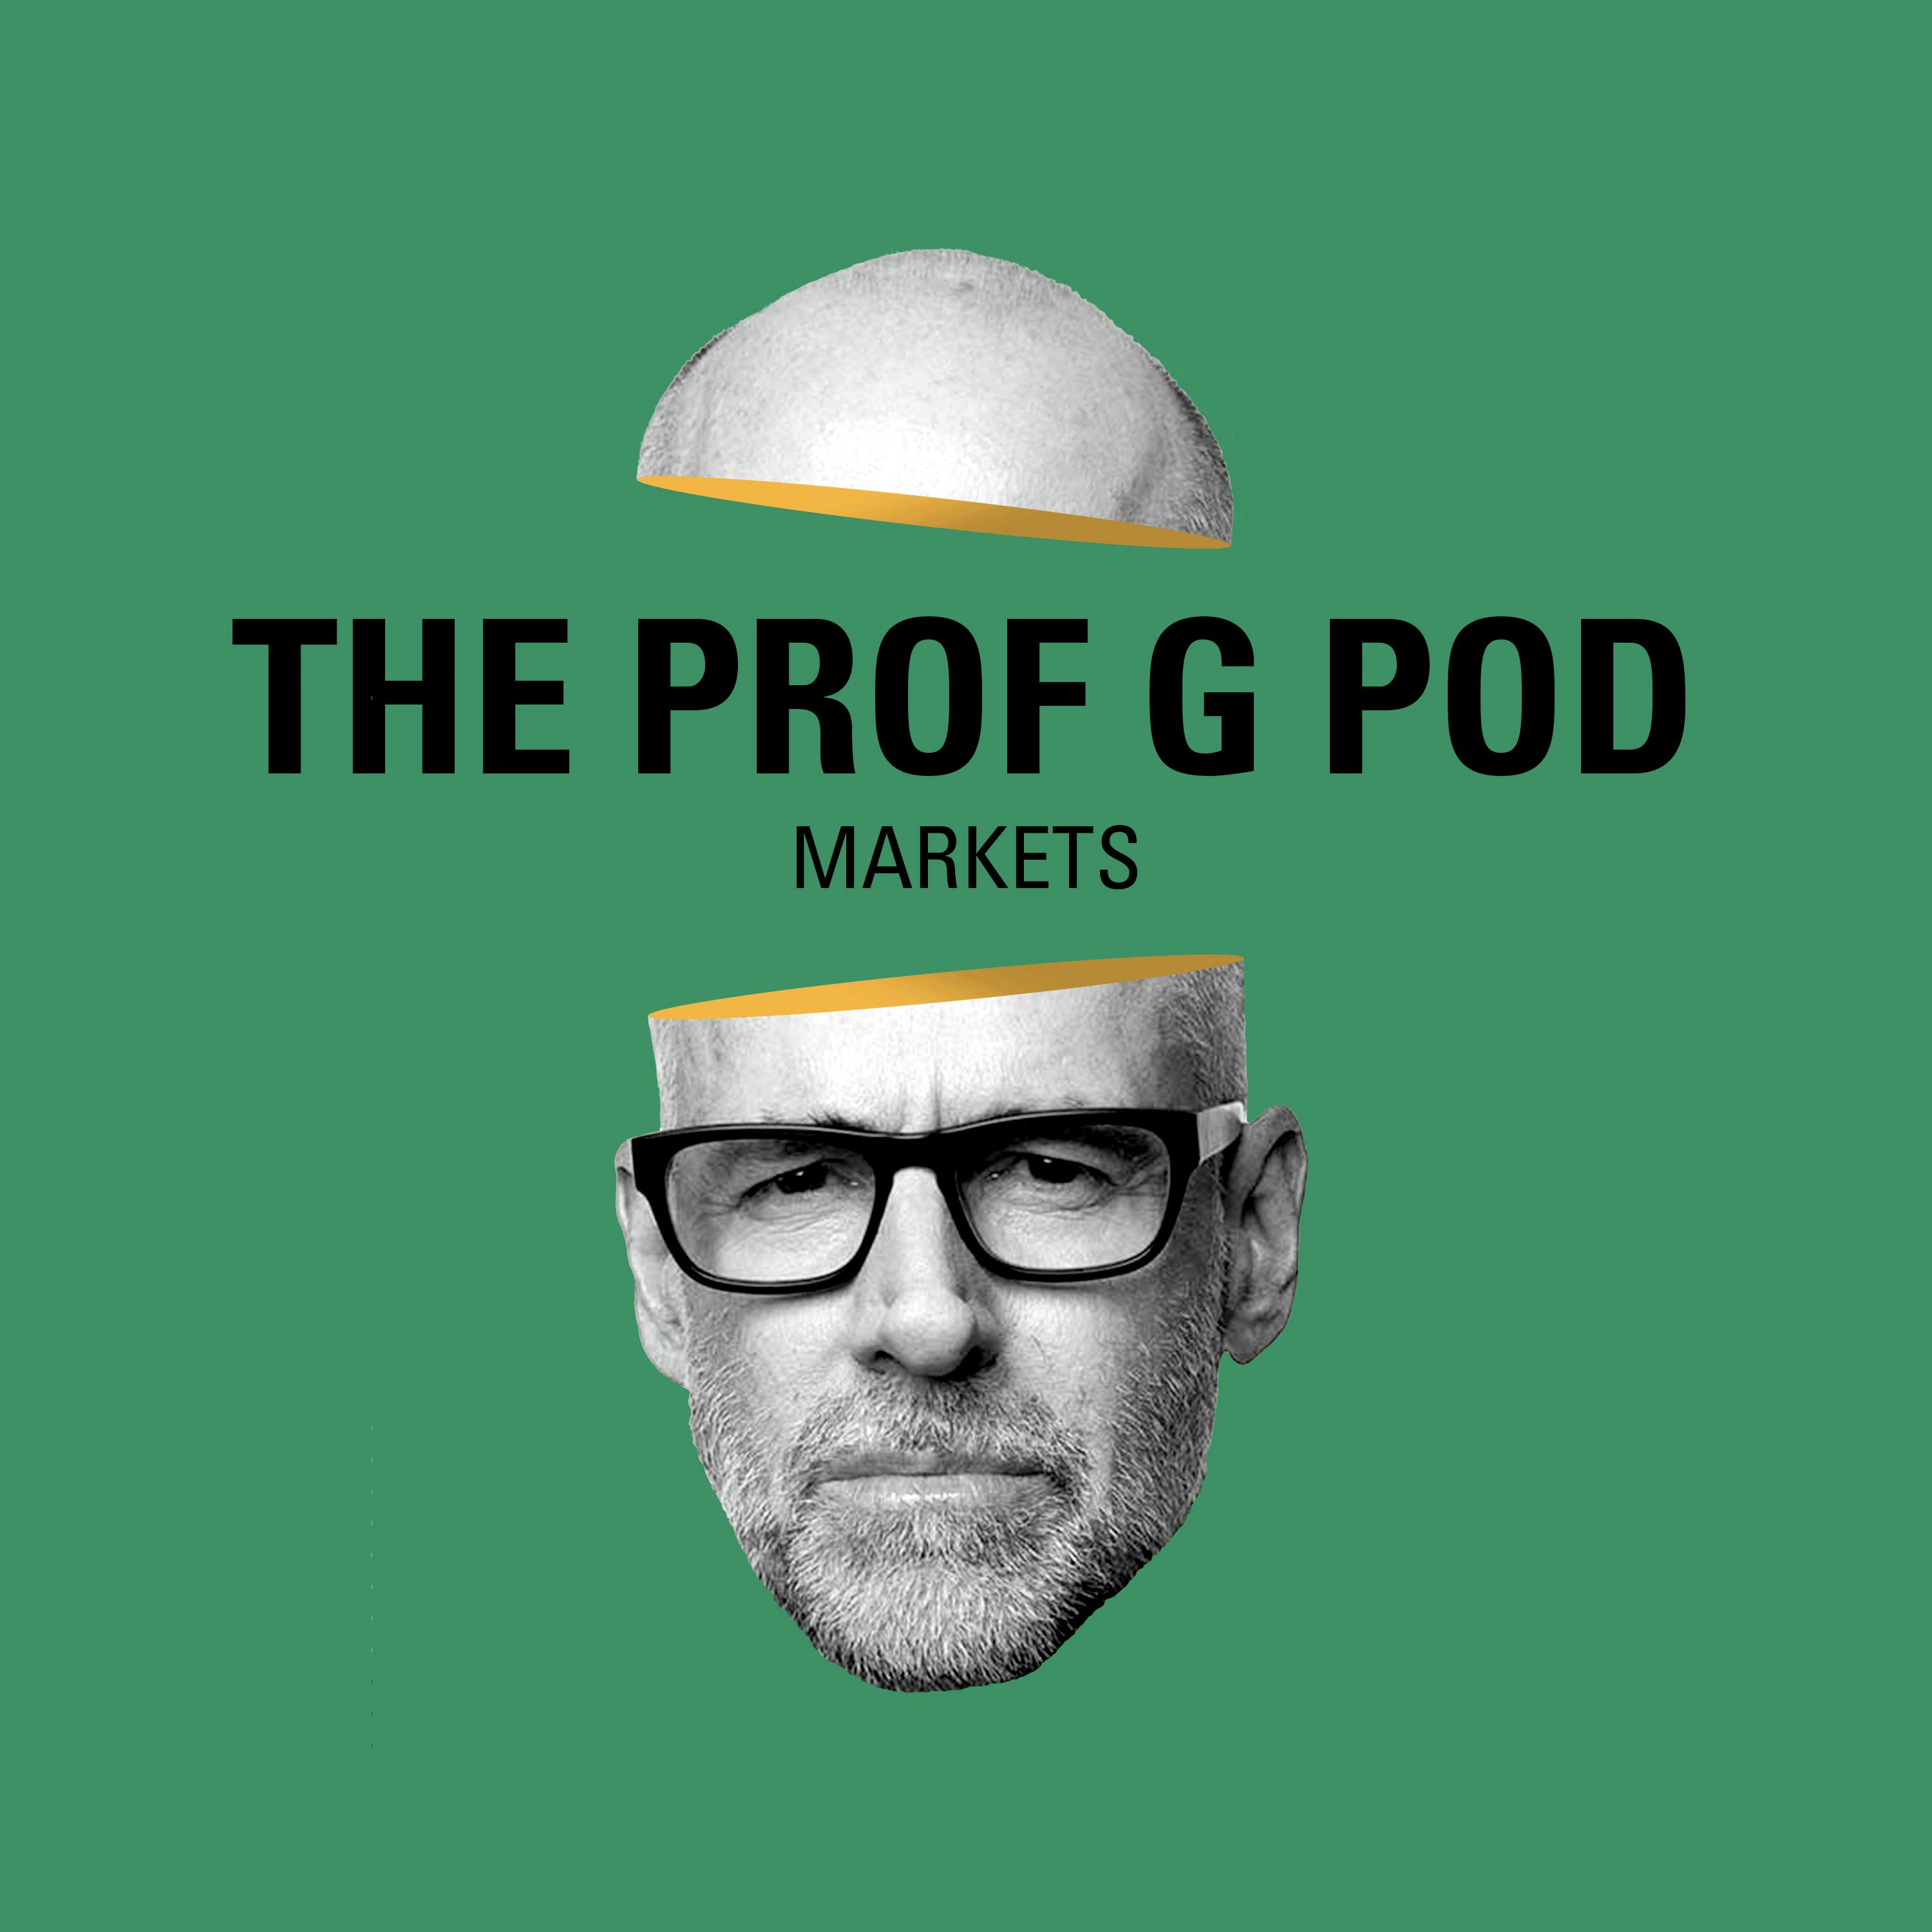 Prof G Markets: Goldman Sachs Restructures its Businesses + Restaurant NFTs, and Nikola’s Securities Fraud Saga by Vox Media Podcast Network